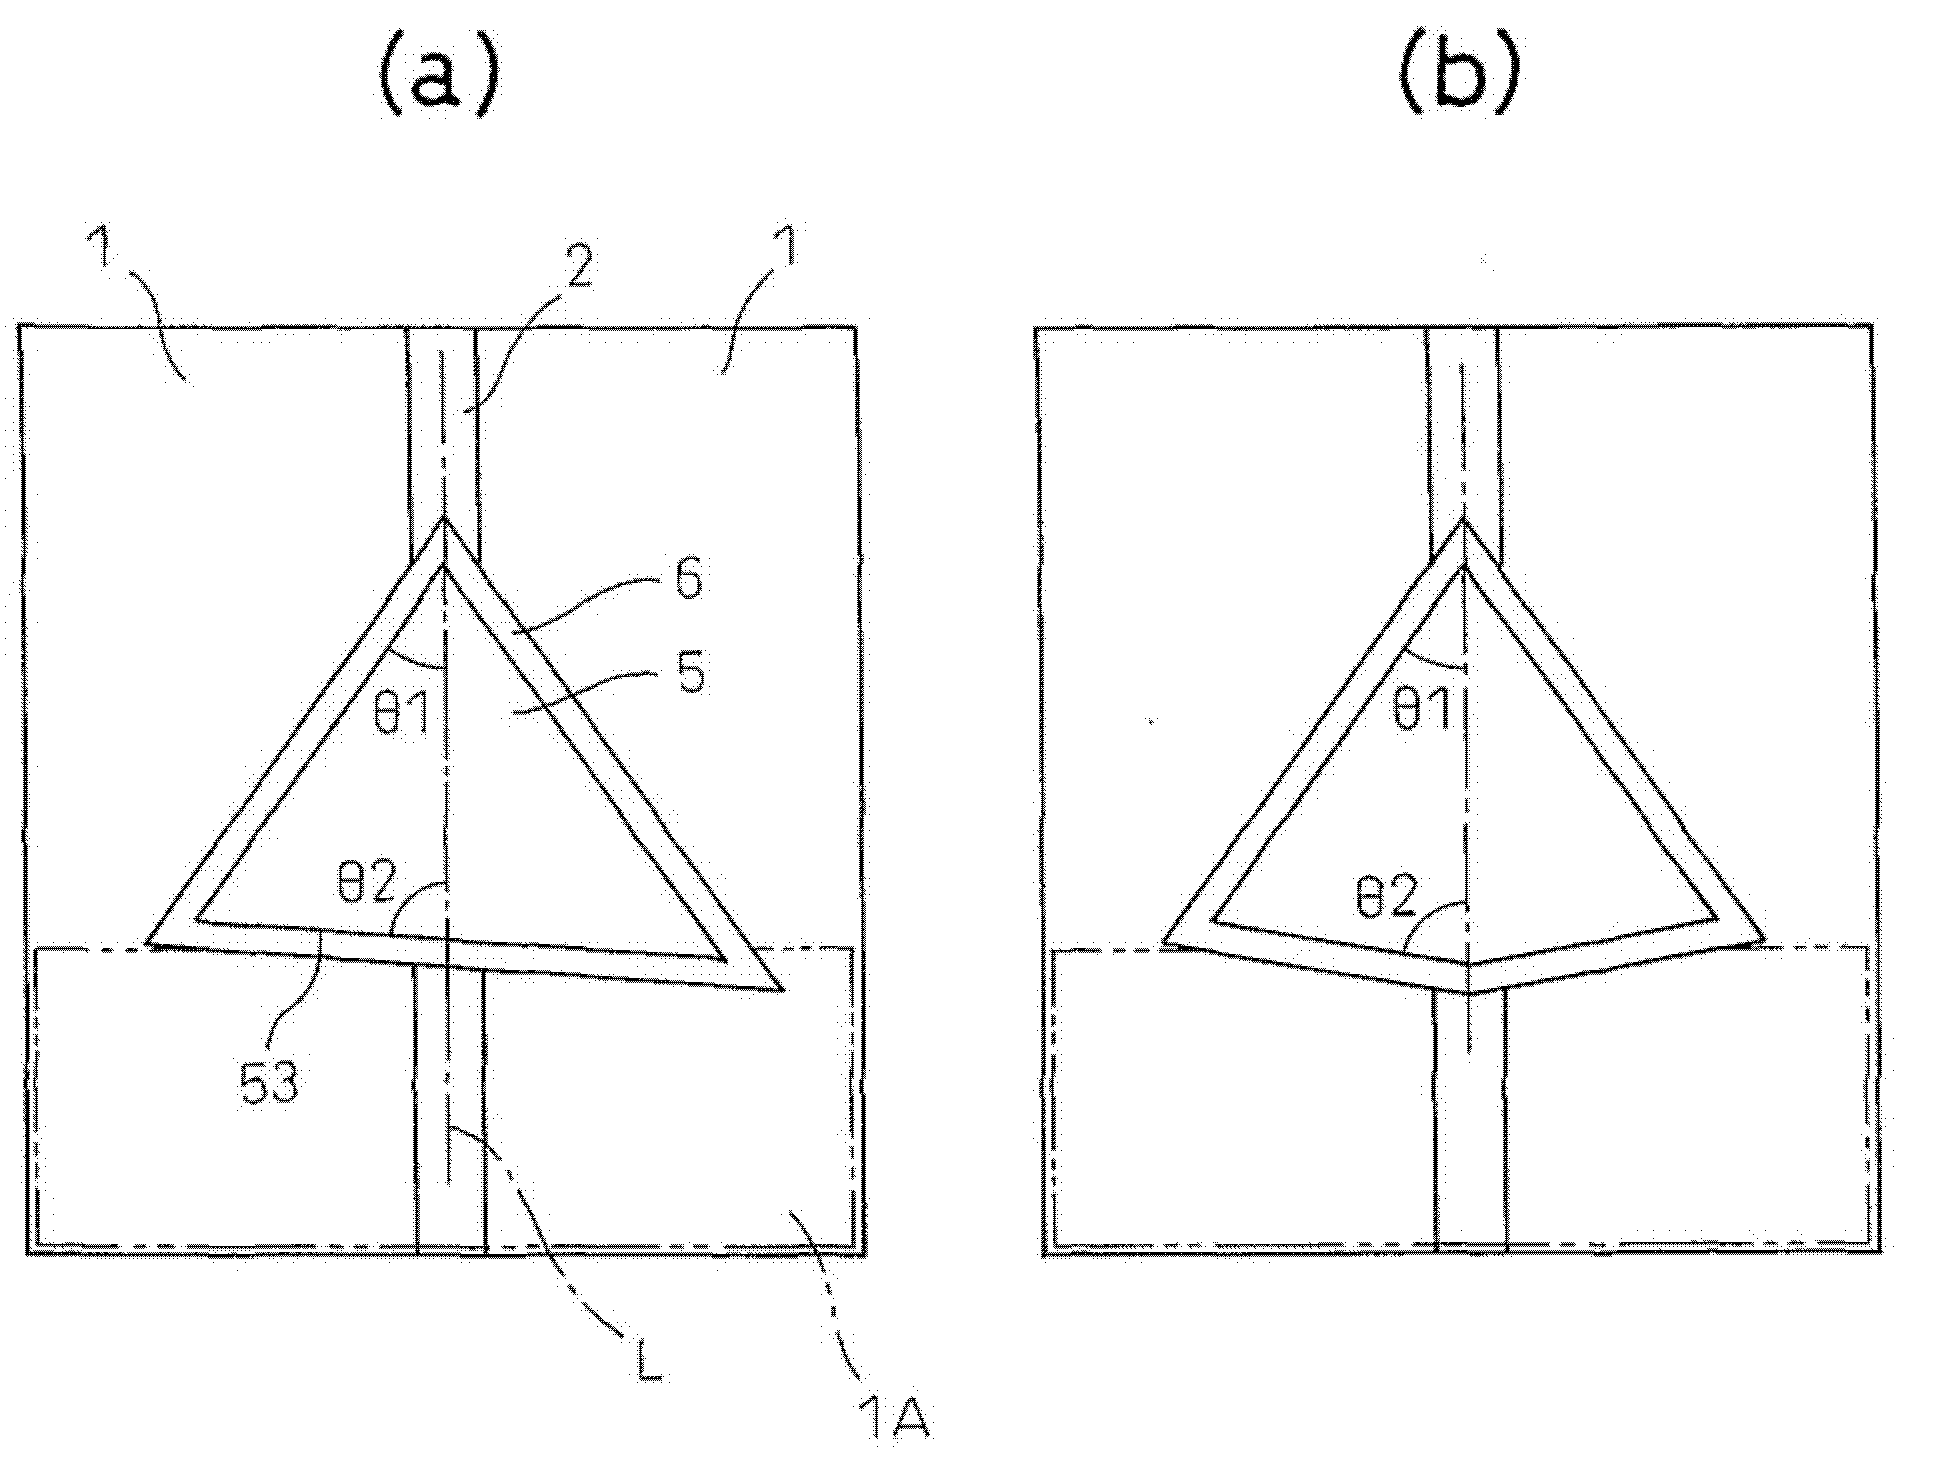 Welding structure with excellent resistance to brittle crack propagation